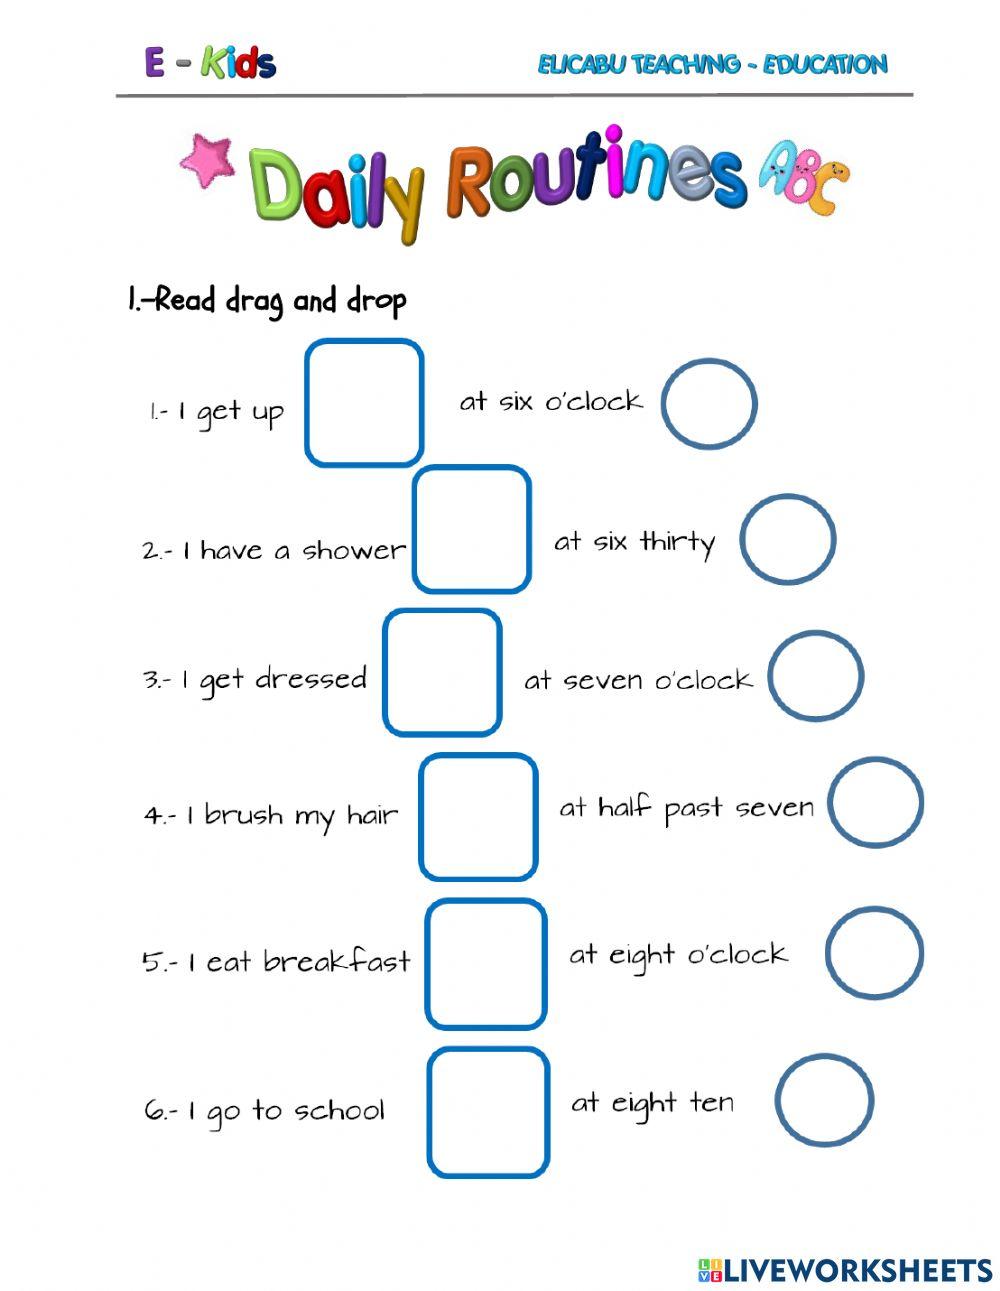 Daily routines - Time